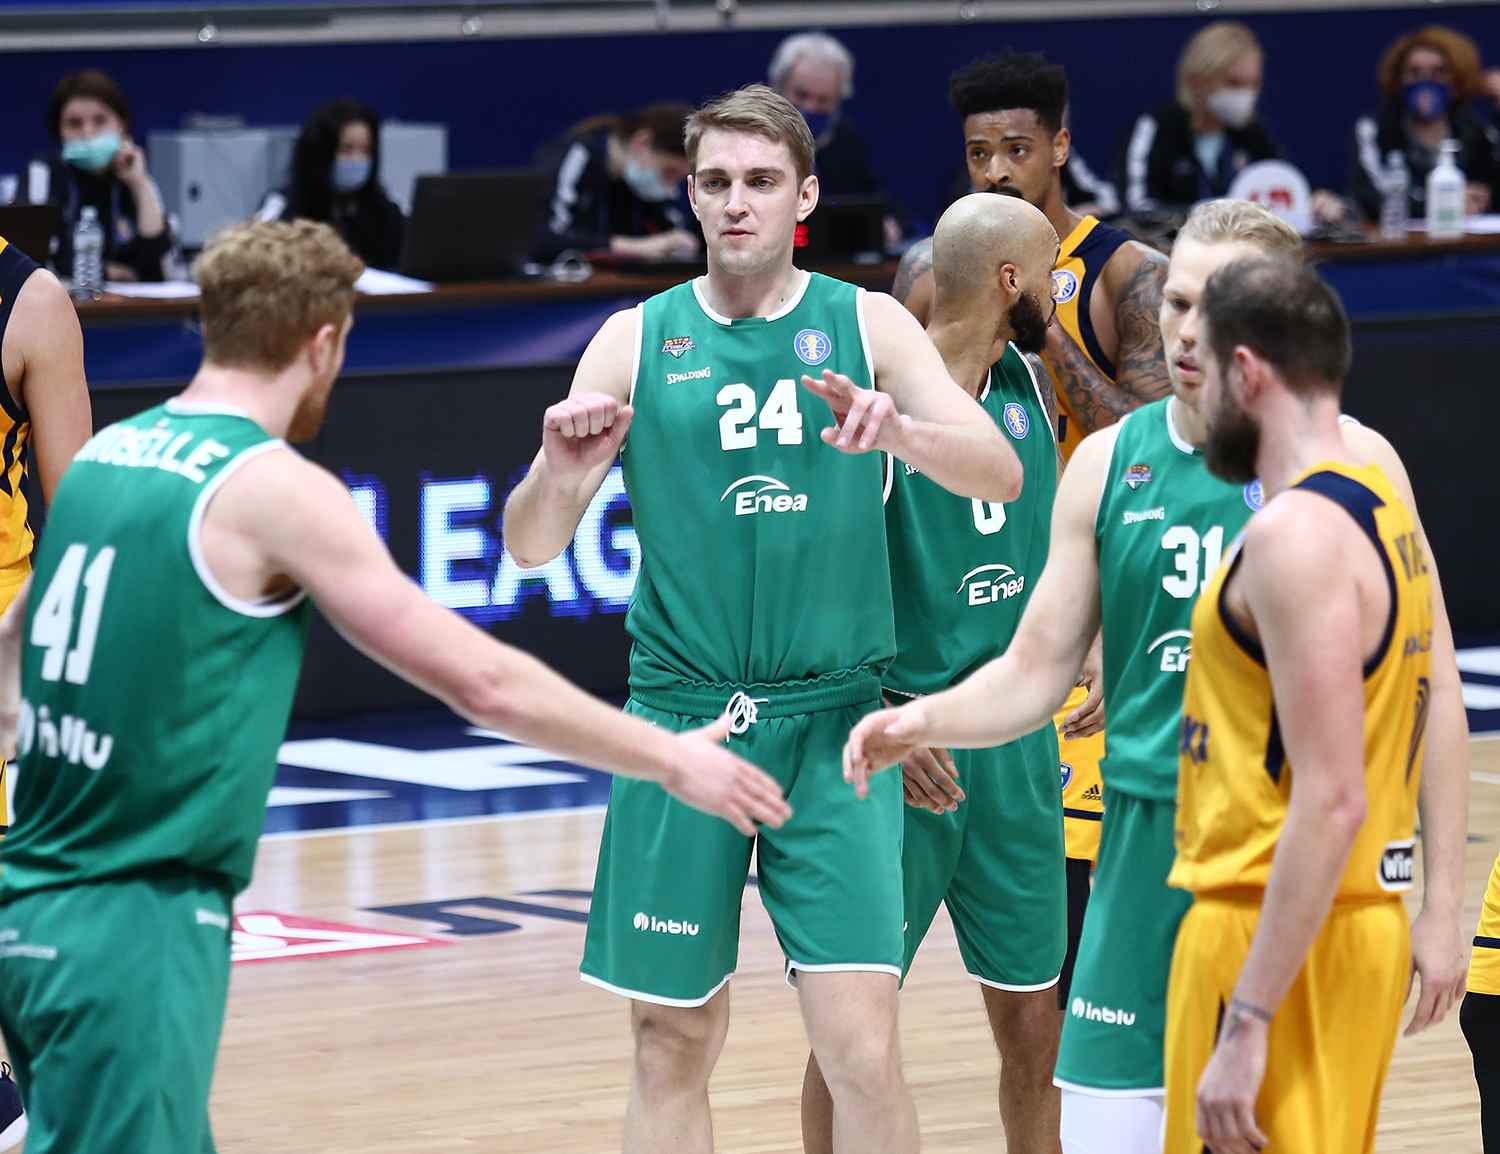 Zielona Gora make history, UNICS continue to win and it is no surprise. Week in review